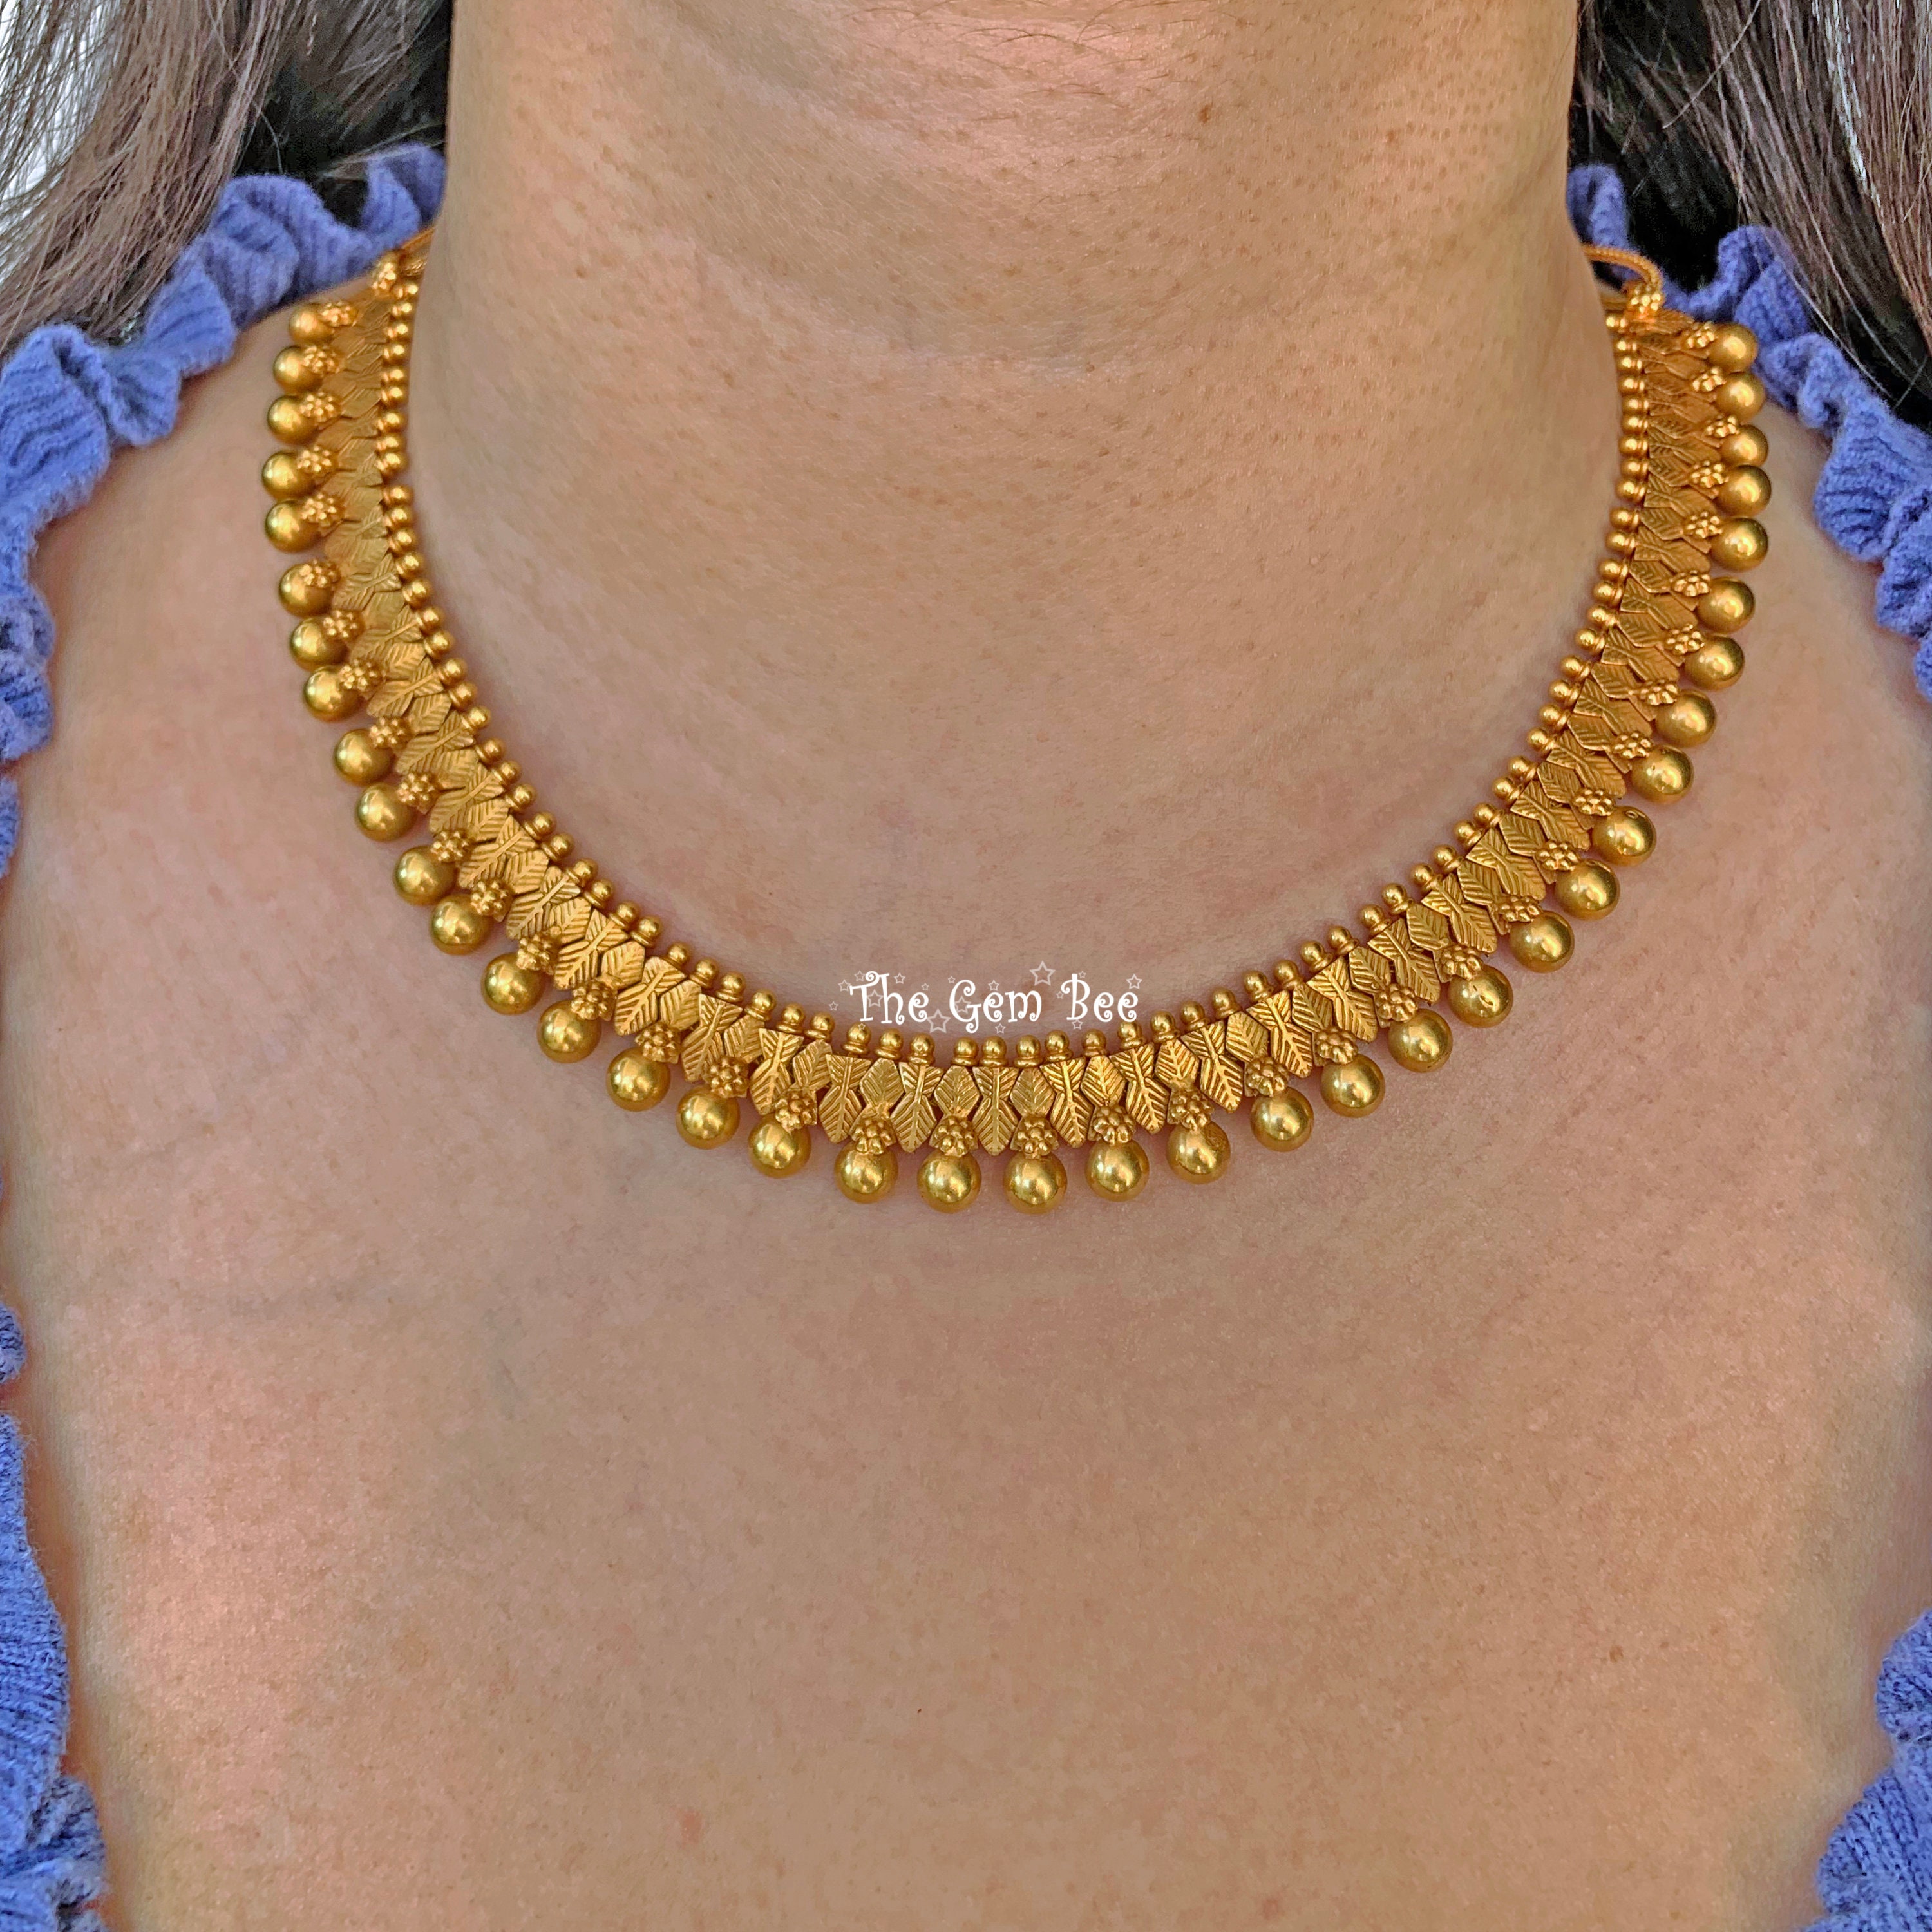 Delicate Choker Necklace in 22ct Gold GNS 182